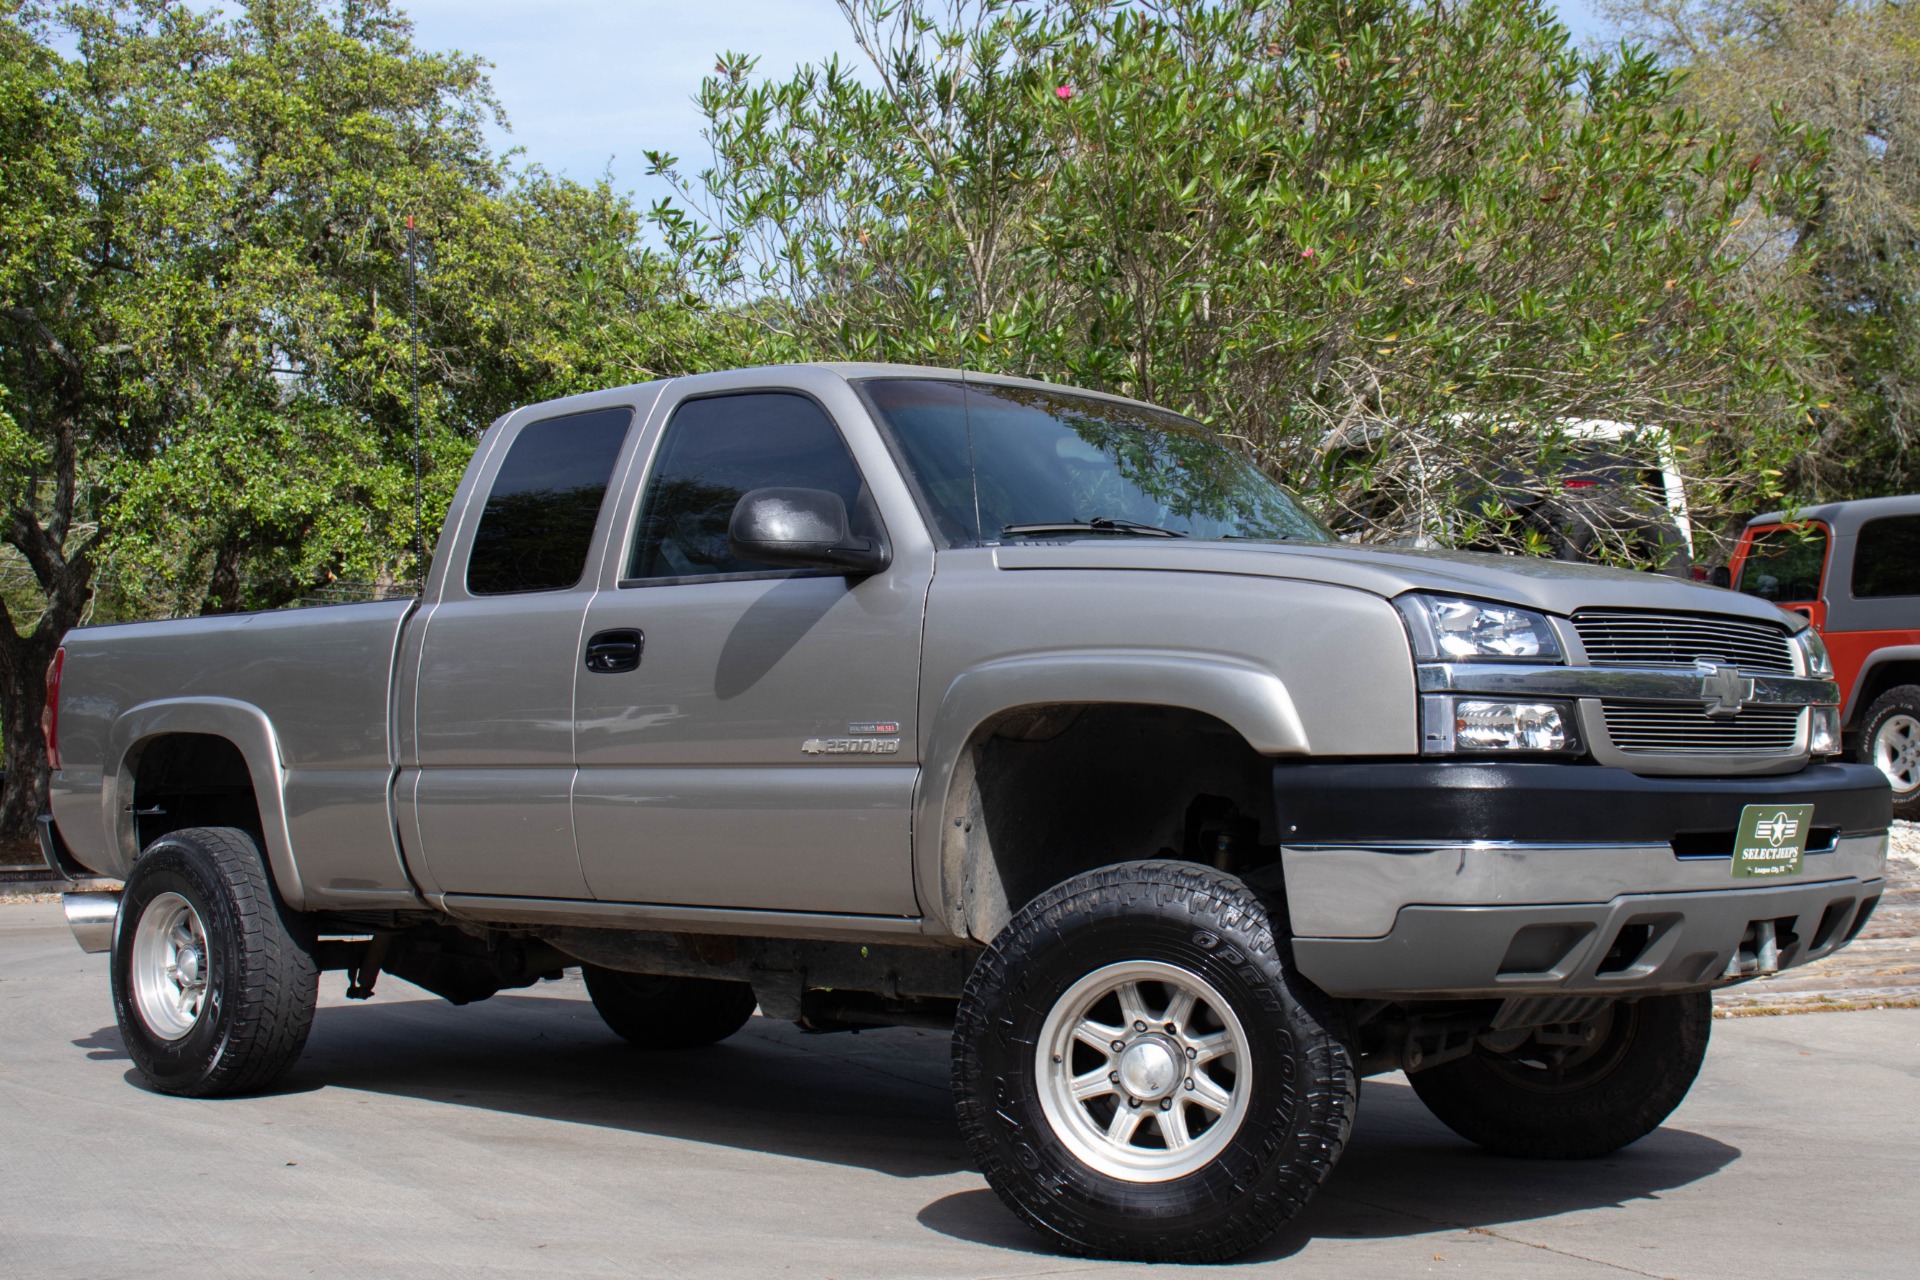 Used 2003 Chevrolet Silverado 2500HD LS For Sale ($12,995) | Select Jeeps  Inc. Stock #298988